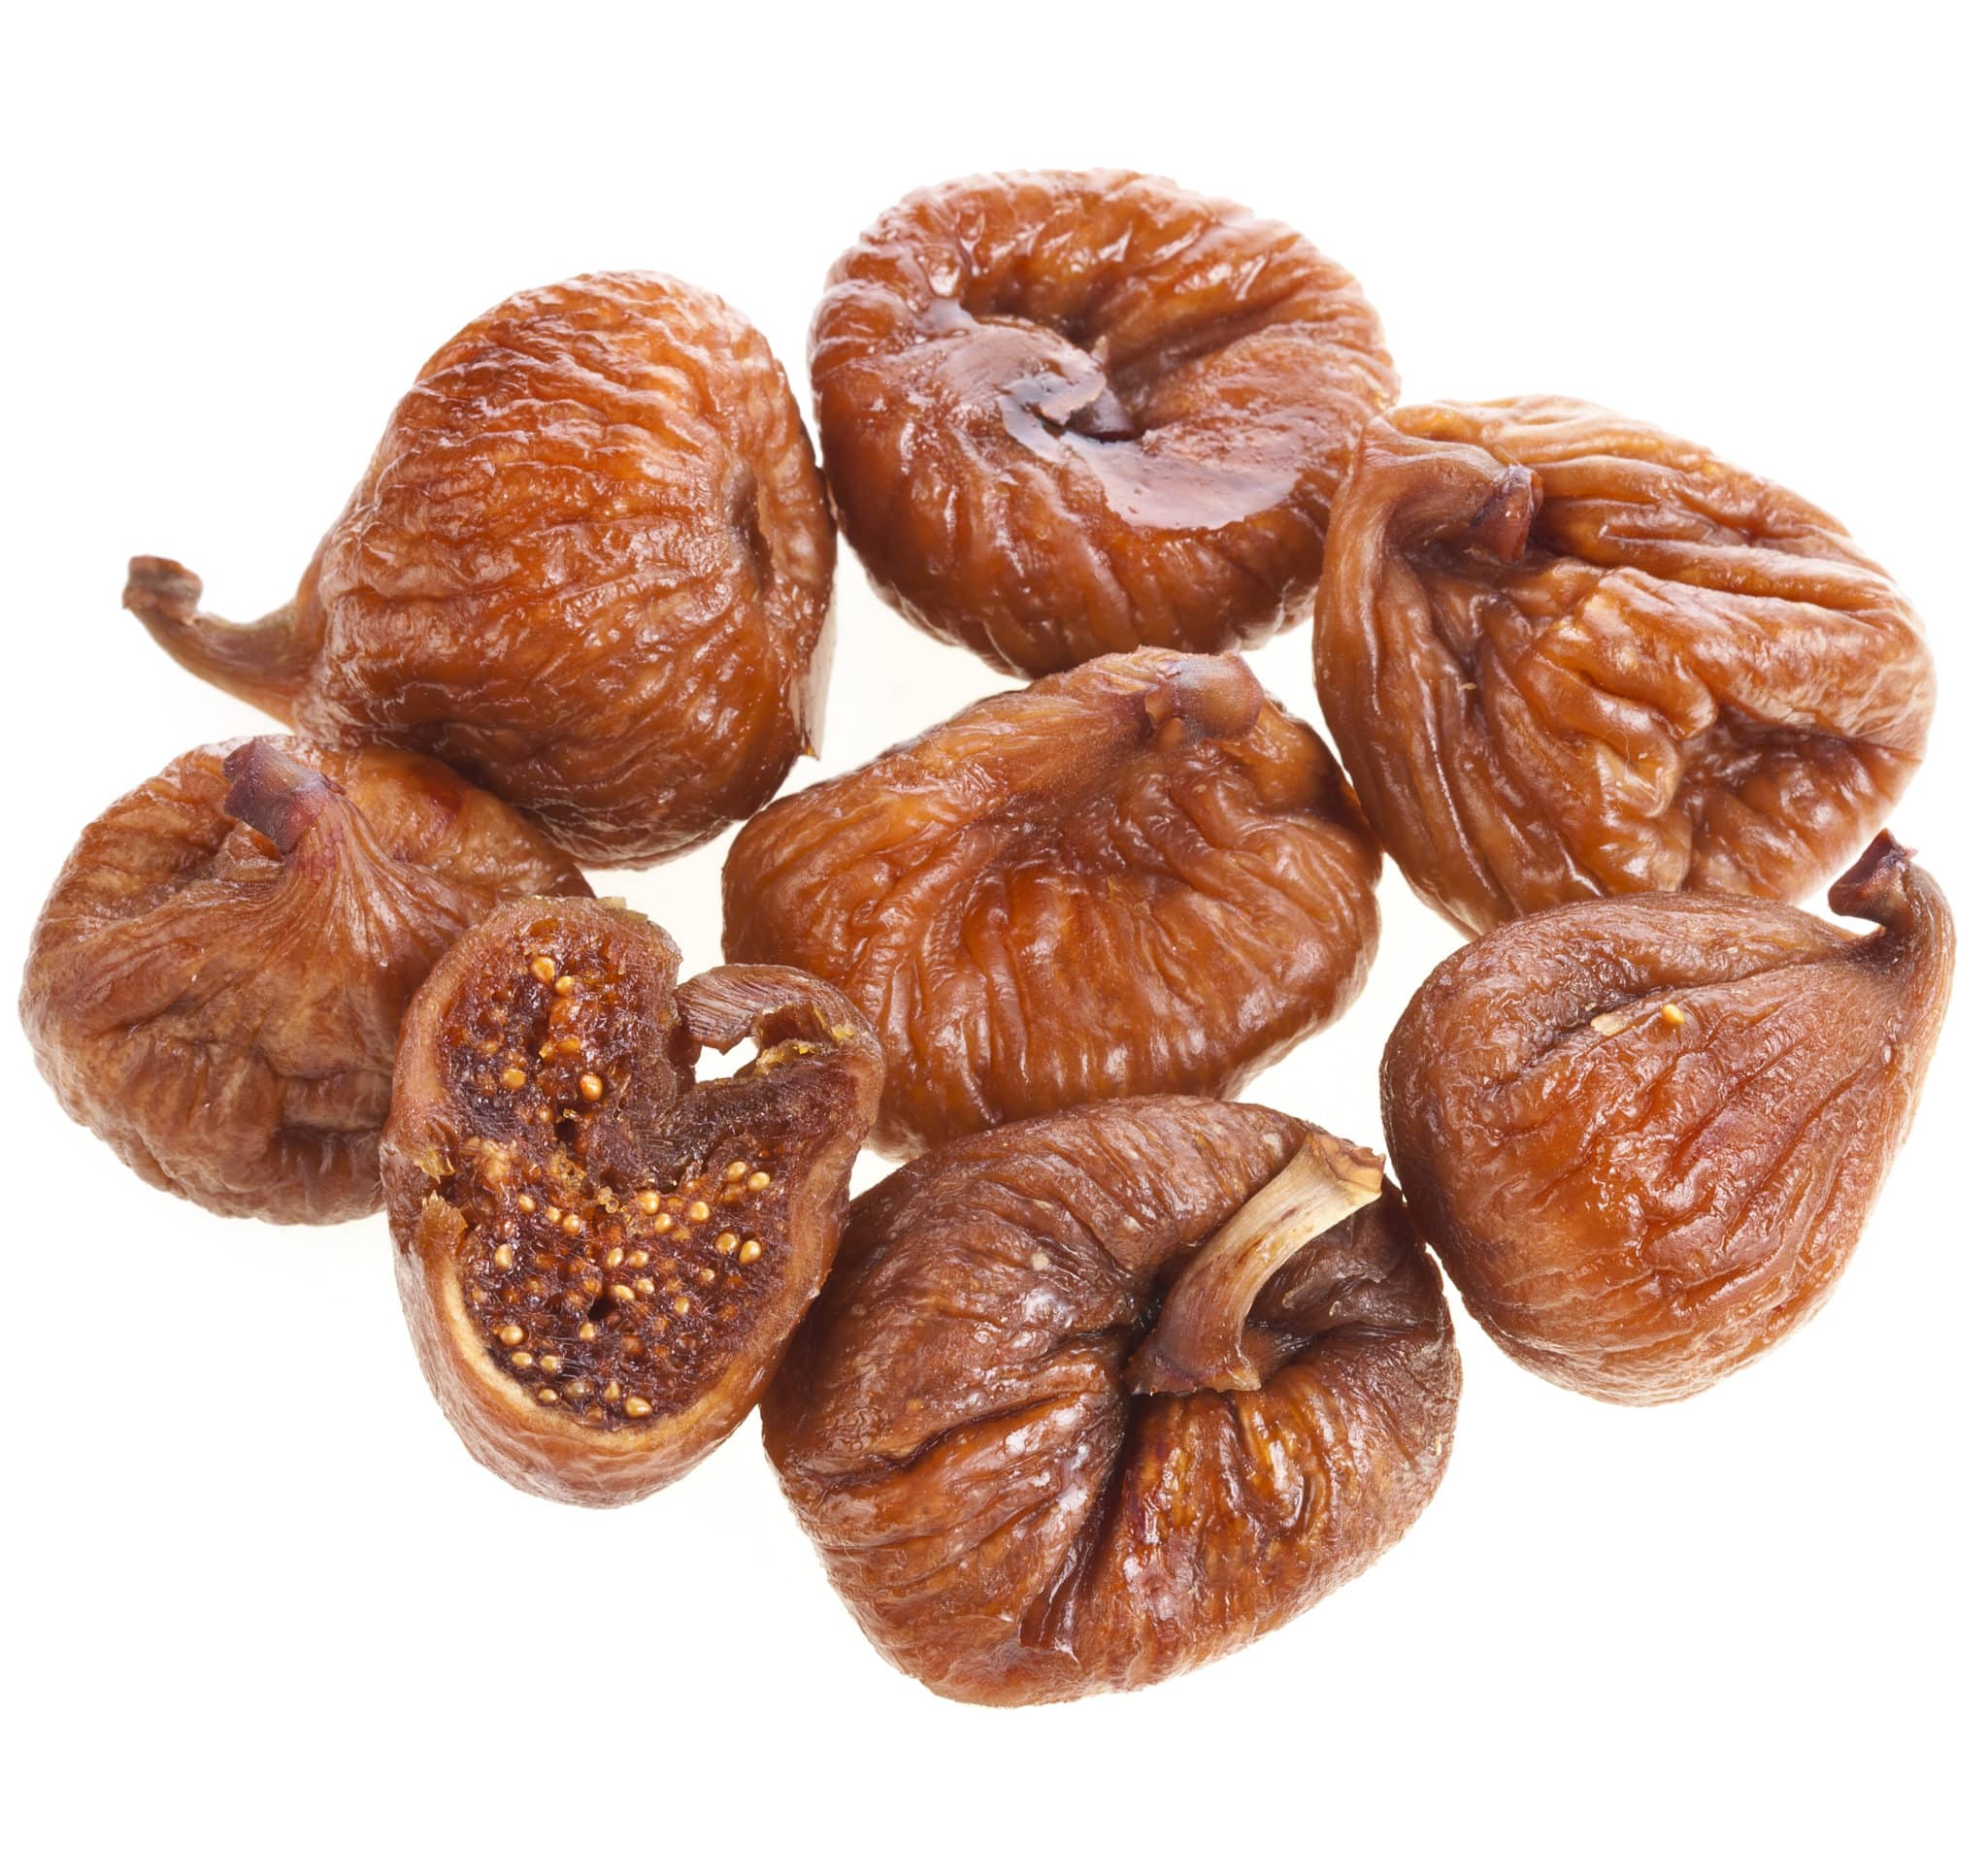 Dried figs on white background